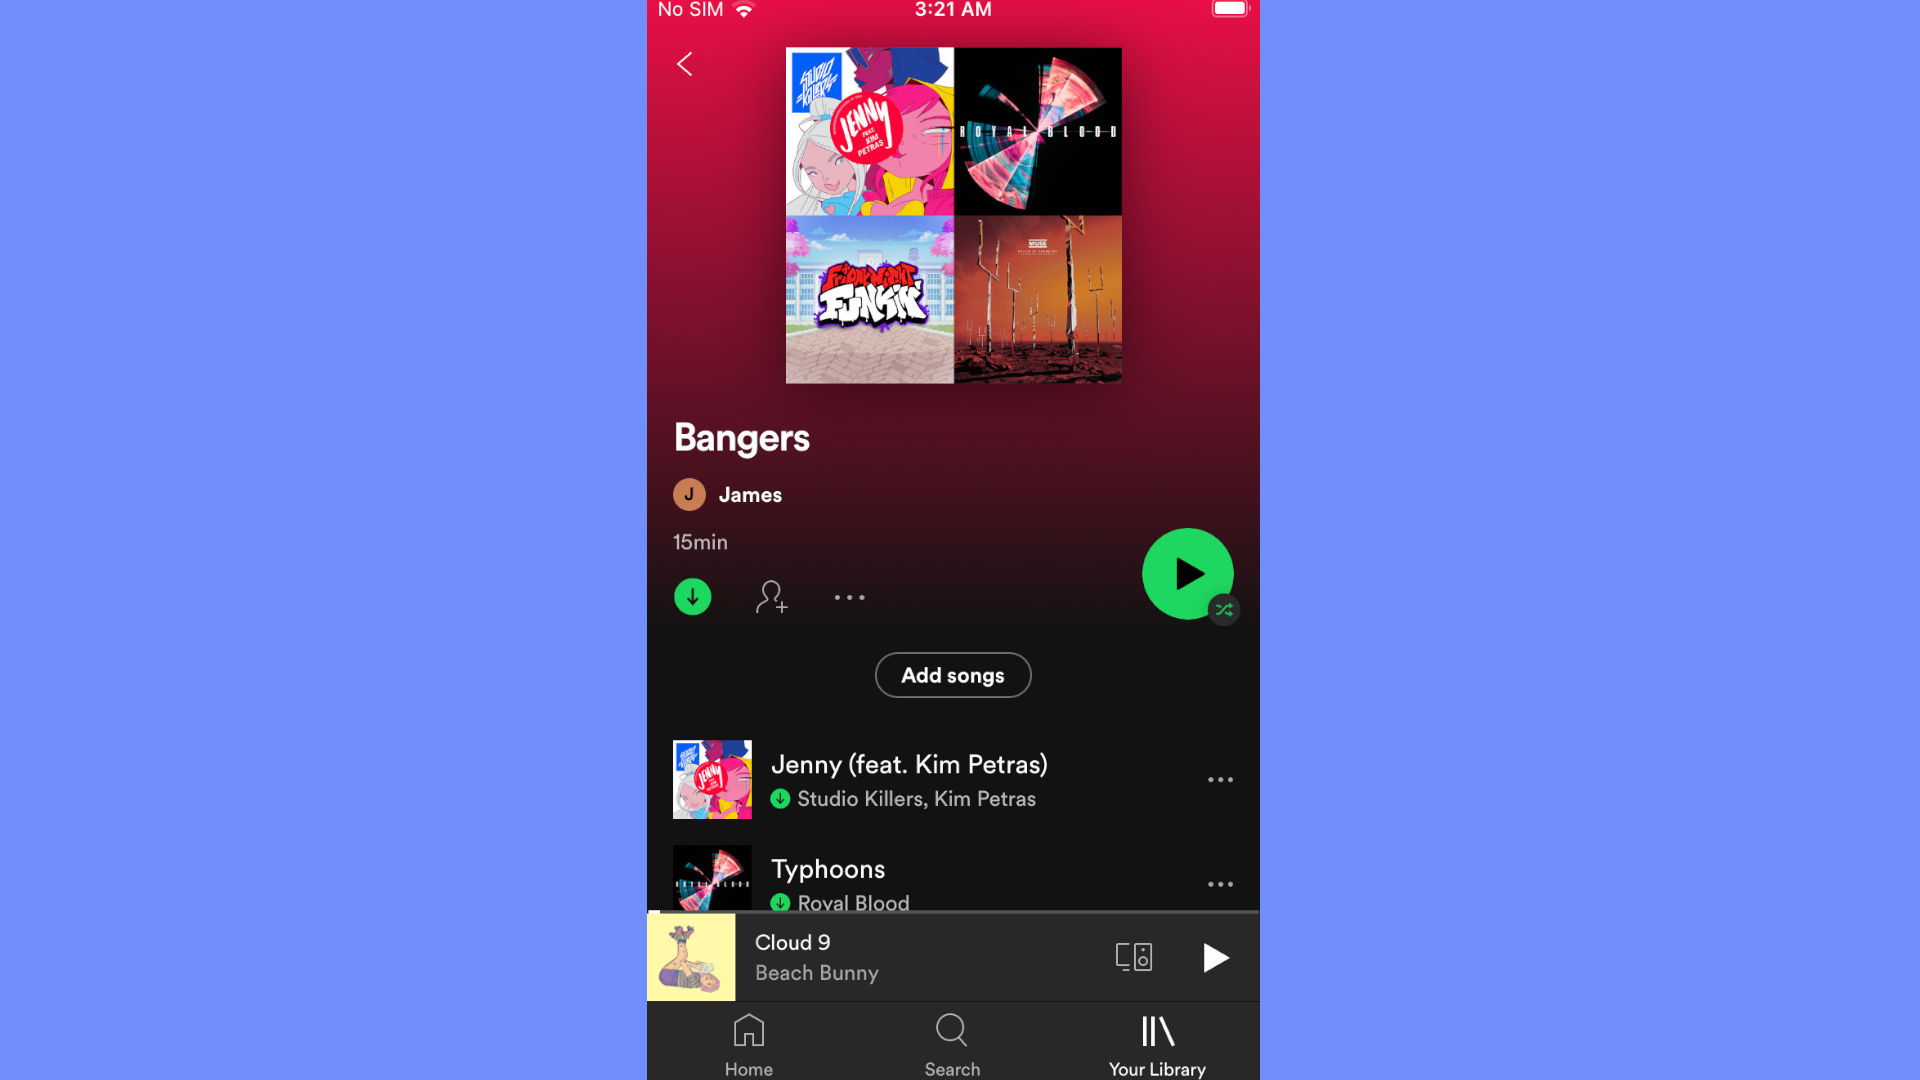 How to Download Songs to Spotify in iOS Step 2: Play Downloaded Songs from Your Library